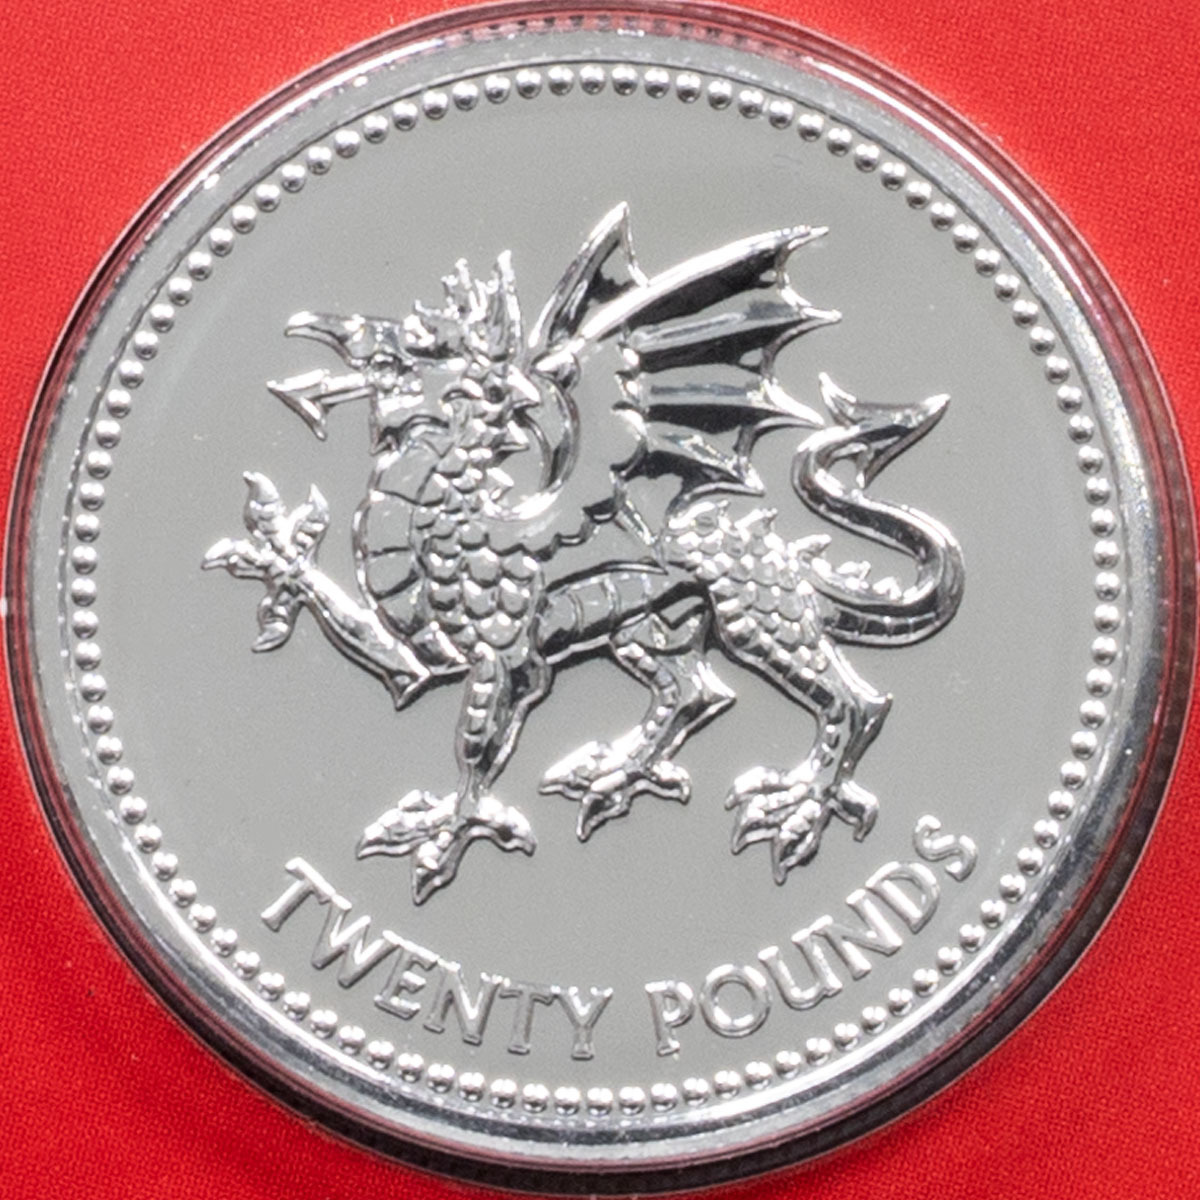 UK16WF20 2016 Welsh Dragon Pride Of Wales Twenty Pound Silver Brilliant Uncirculated Coin In Folder Reverse